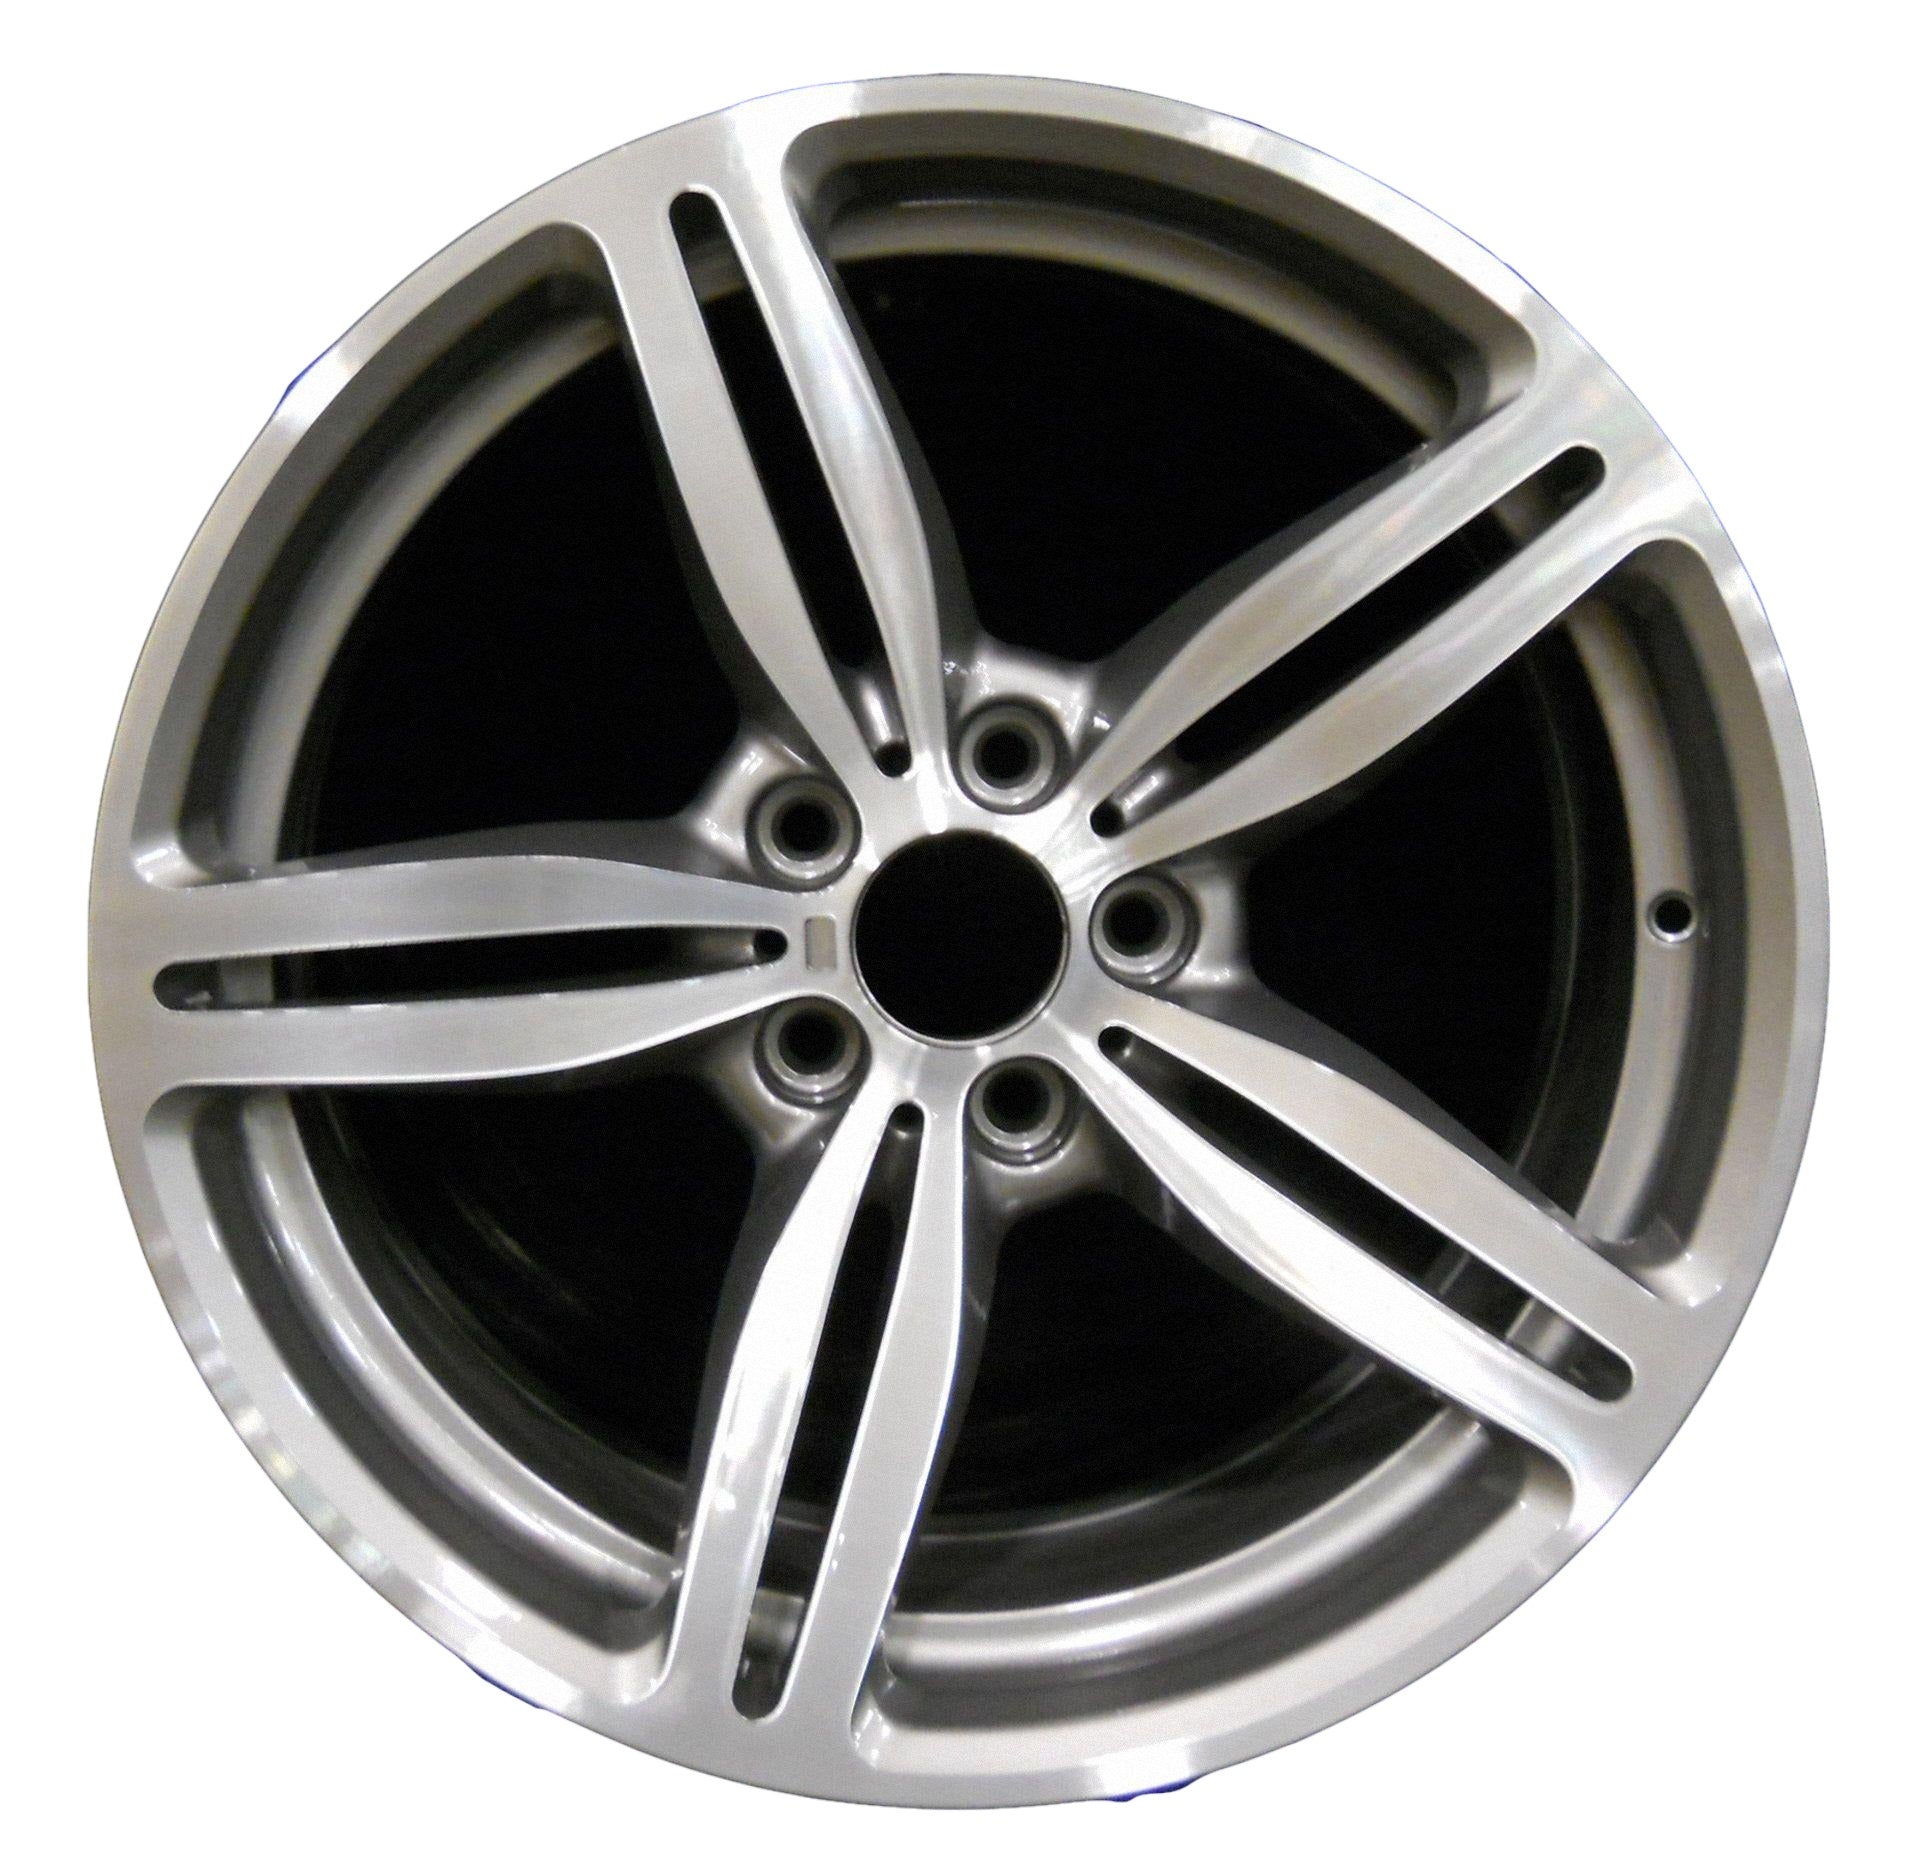 BMW M6  2006, 2007, 2008, 2009, 2010 Factory OEM Car Wheel Size 19x9.5 Alloy WAO.59600.LC25.MABRT